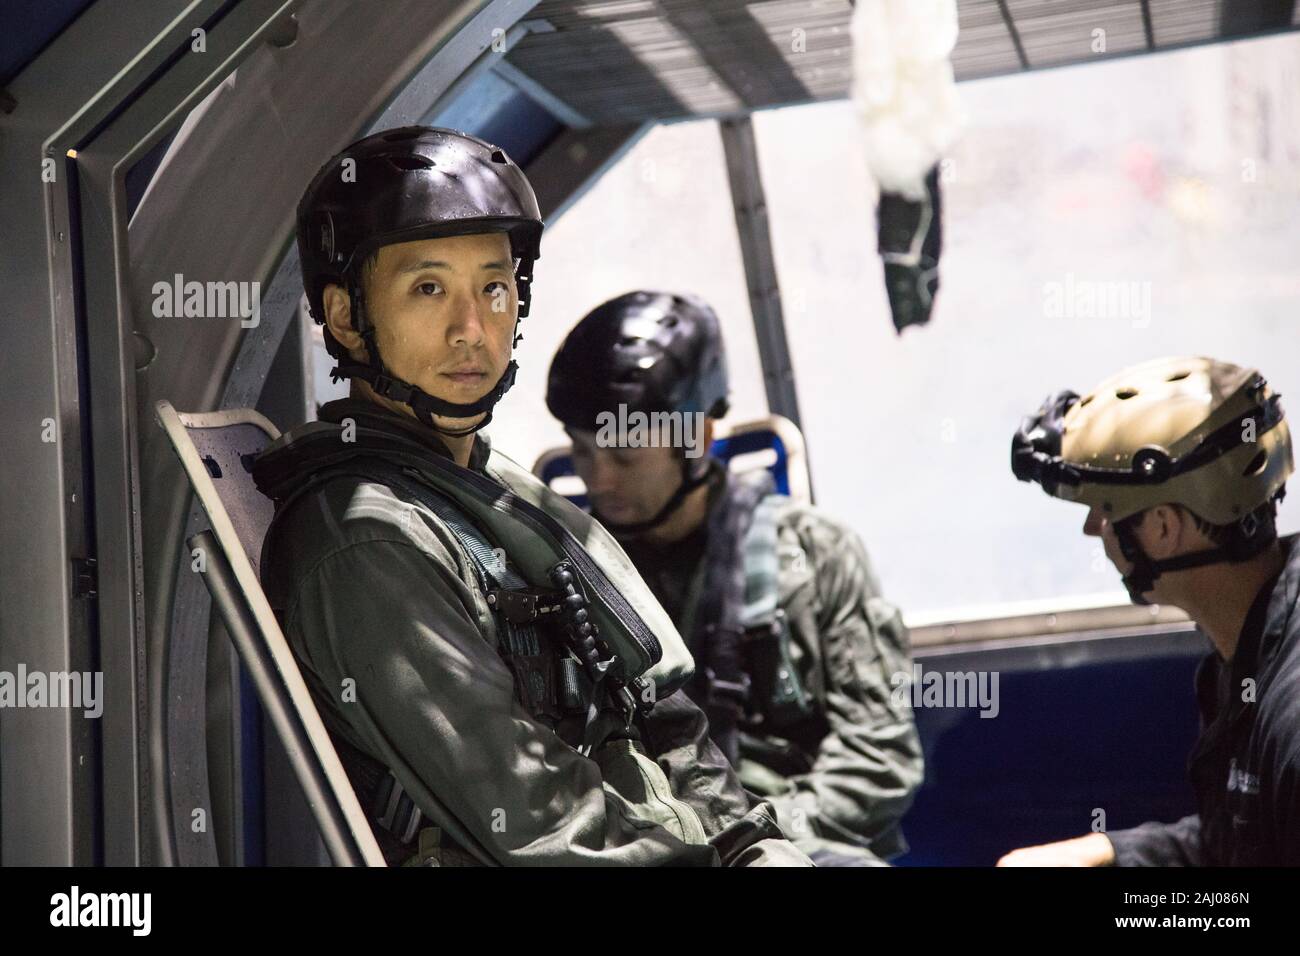 NASA astronaut candidate Jonny Kim during helicopter water survival training in the Sonny Carter Neutral Buoyancy Laboratory at Johnson Space Center September 21, 2017 in Houston, Texas. Stock Photo